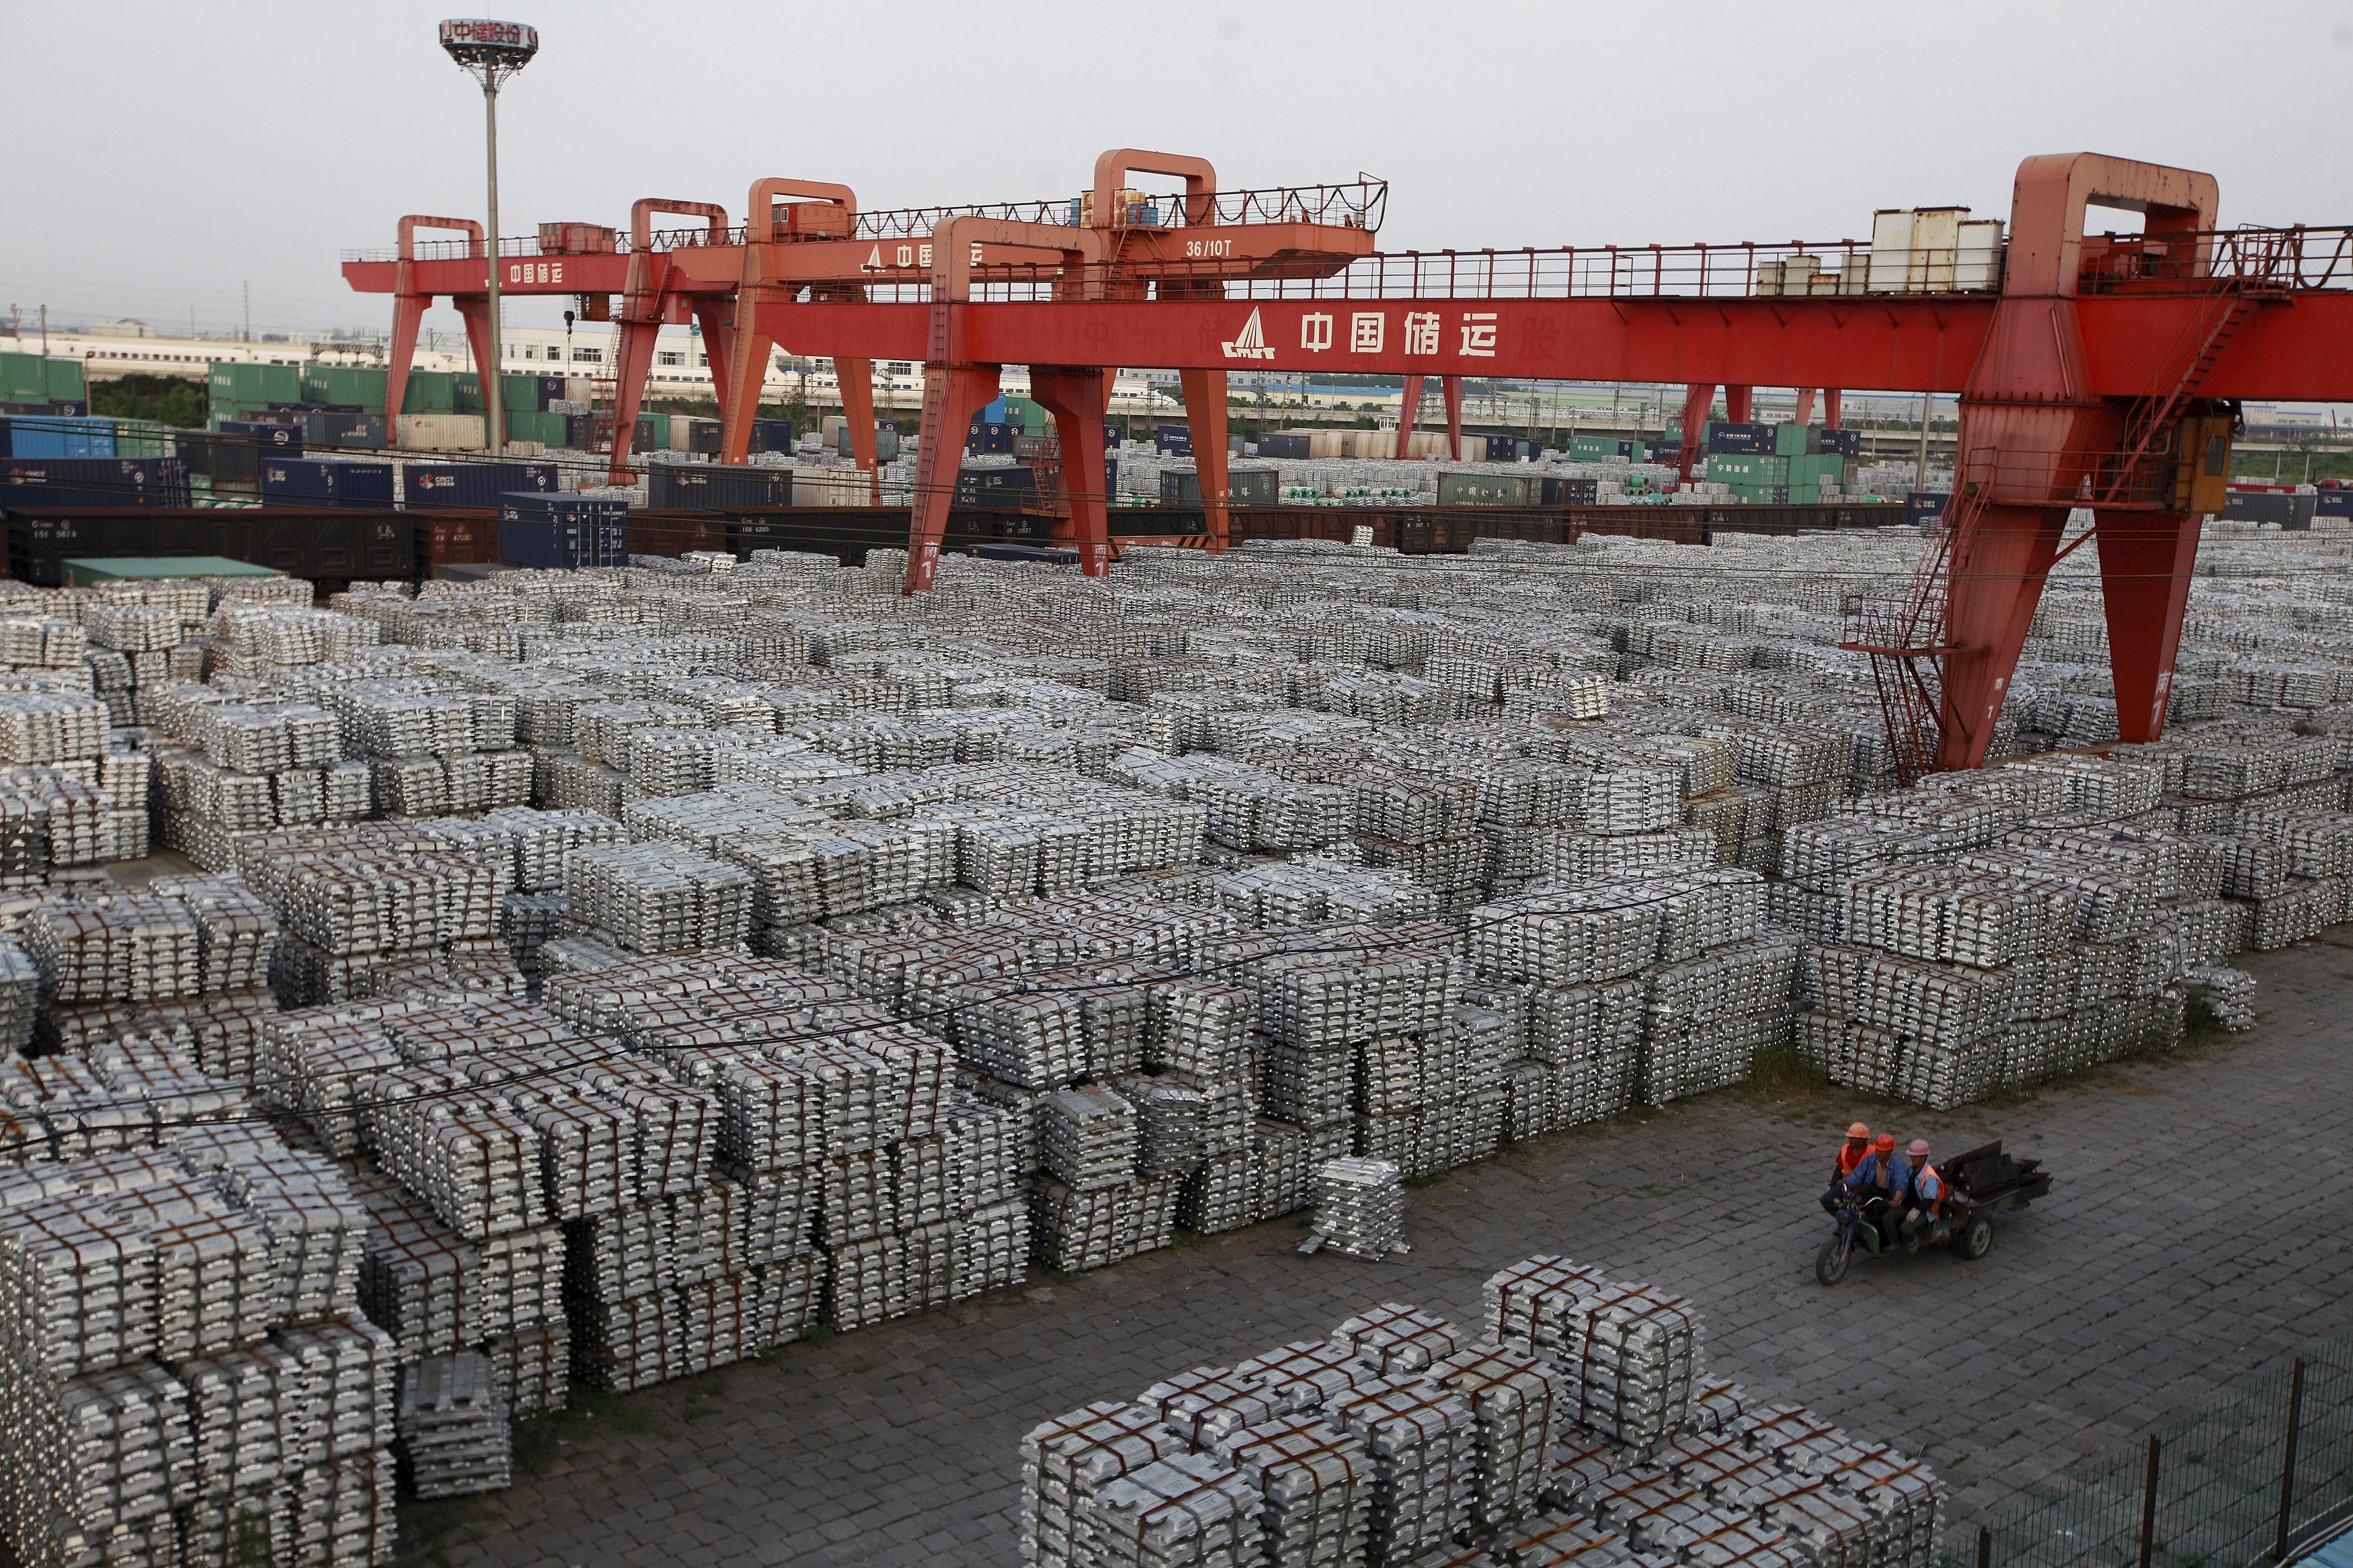 Aluminium capacity cutbacks have led to improvements in market equilibrium, helping shore up the prices of aluminium producers such as China Hongqiao. Photo: Reuters